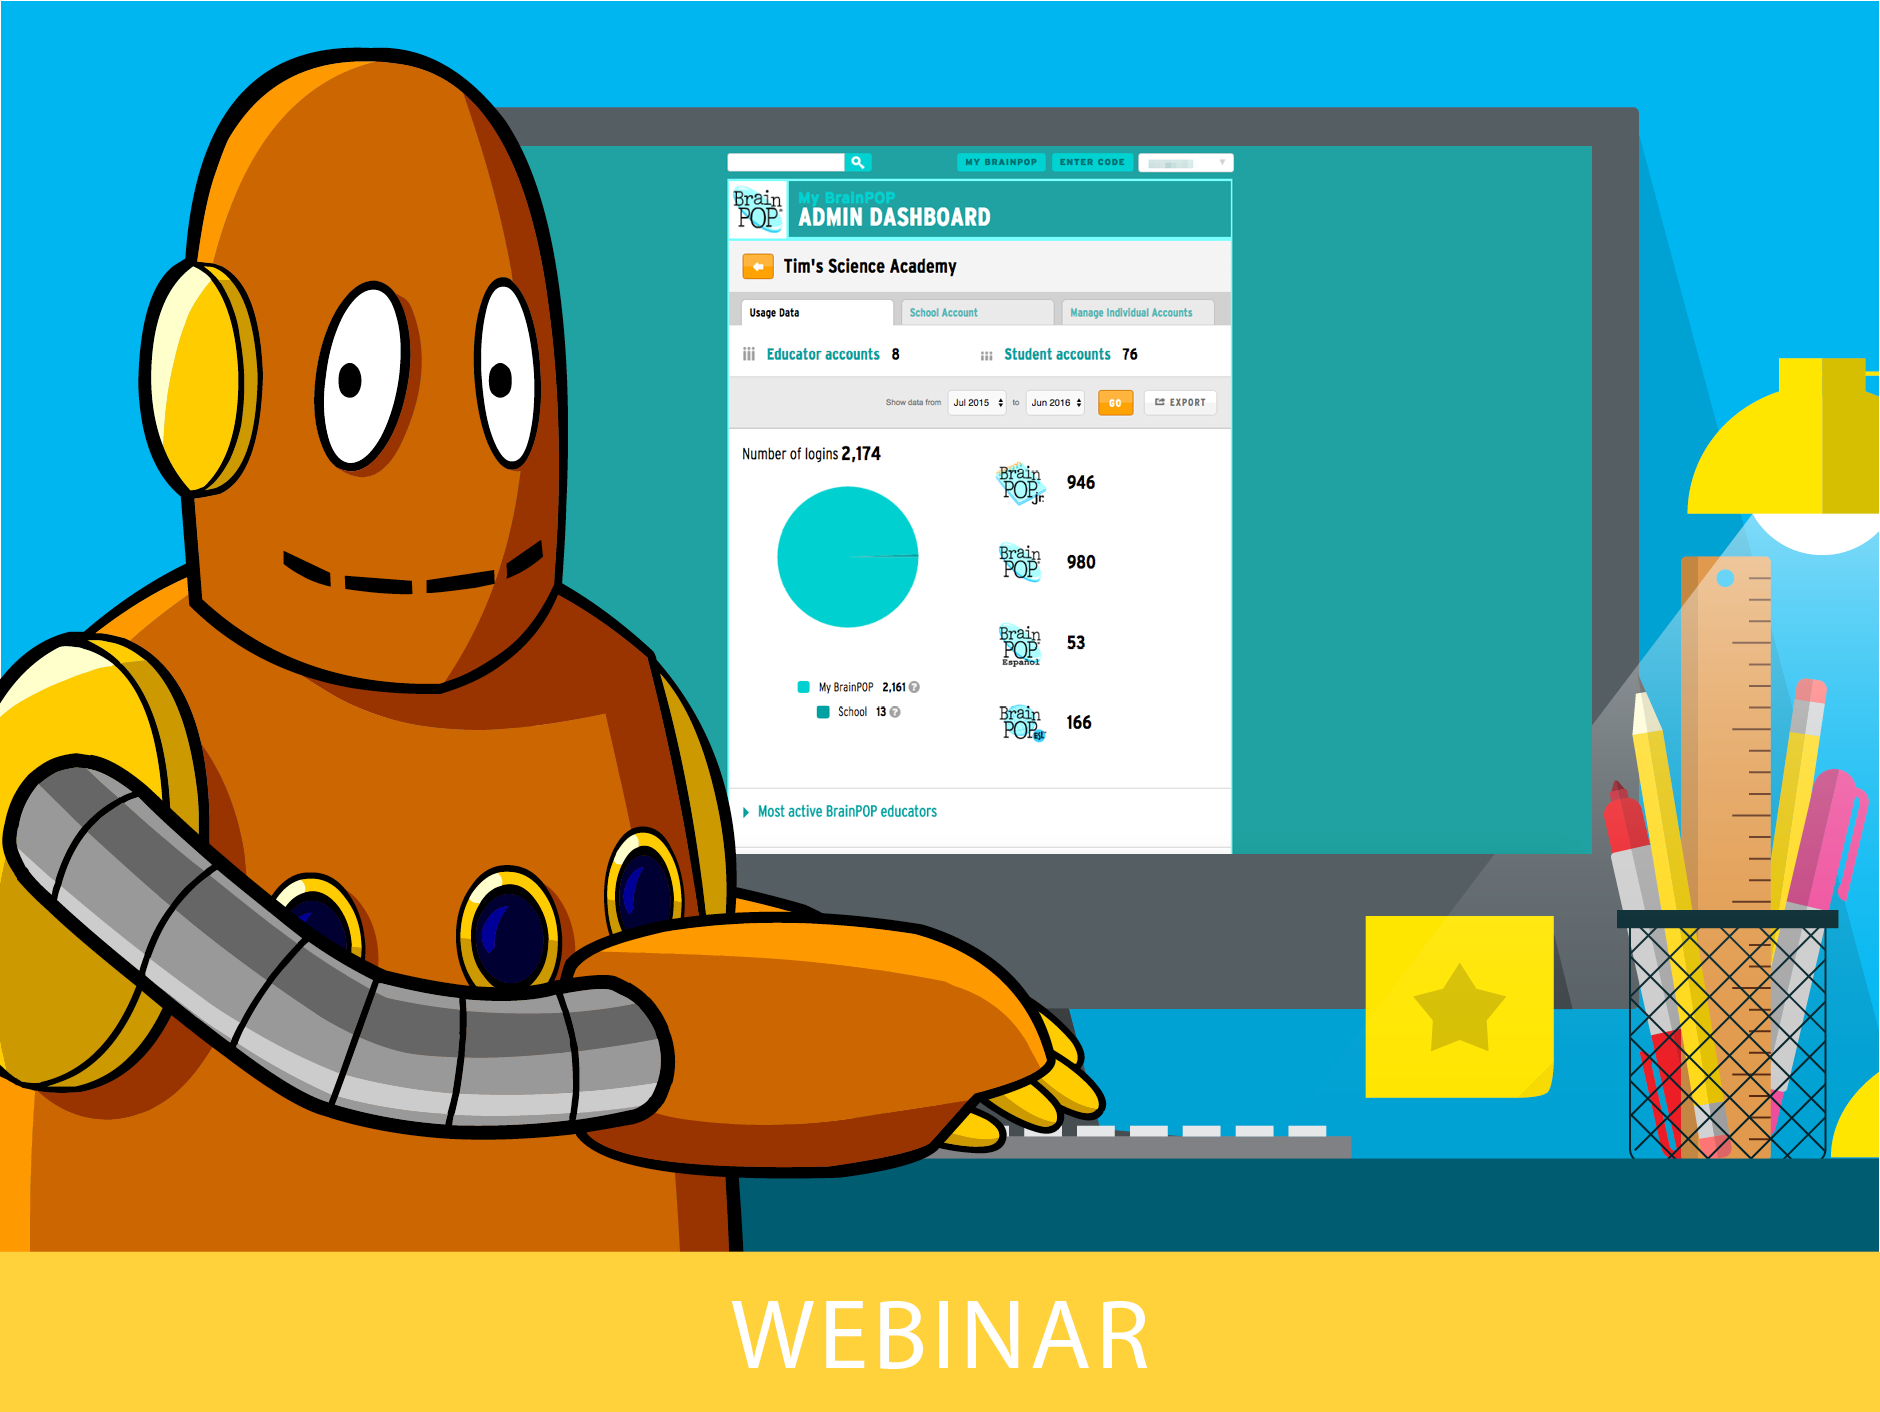 My BrainPOP is YOUR BrainPOP: Getting Started With the Admin Dashboard & SSO